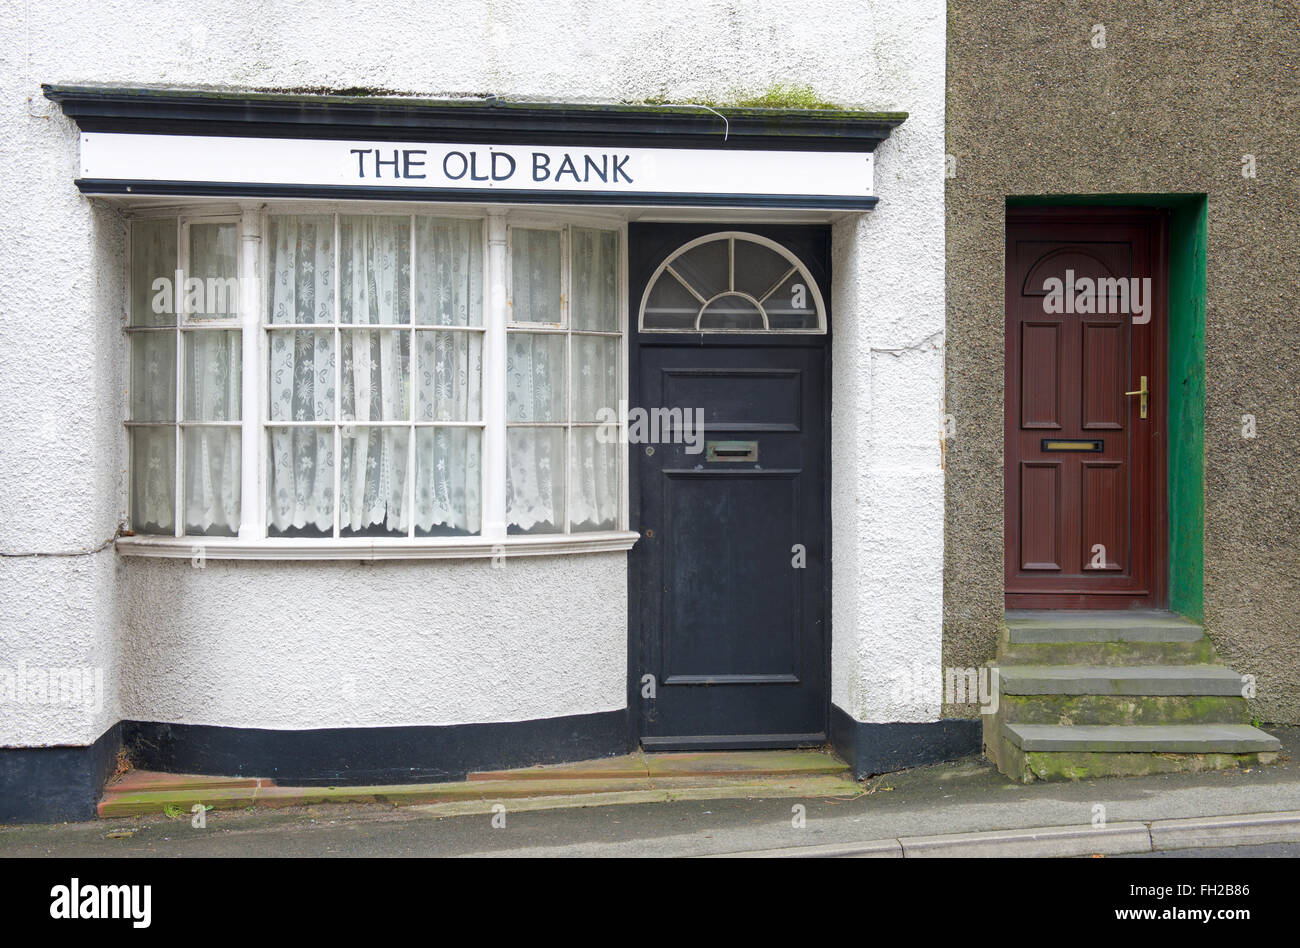 Haus - The Old Bank - im Dorf Bootle, West Cumbria, England UK Stockfoto